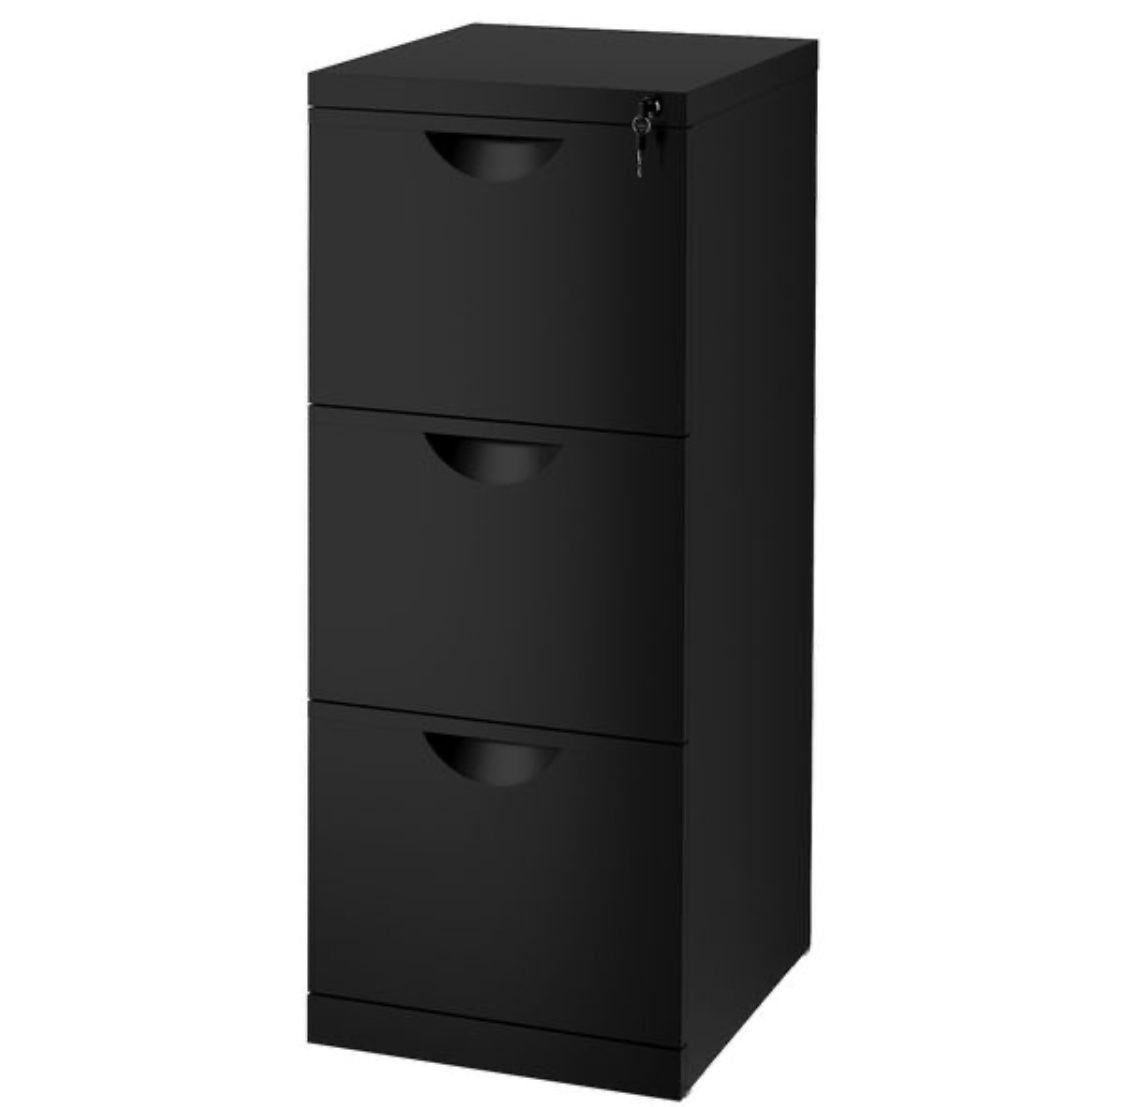 Ikea black metal file cabinet (Key lock style) Almost Brand new condition W 16” D 20” H 41”